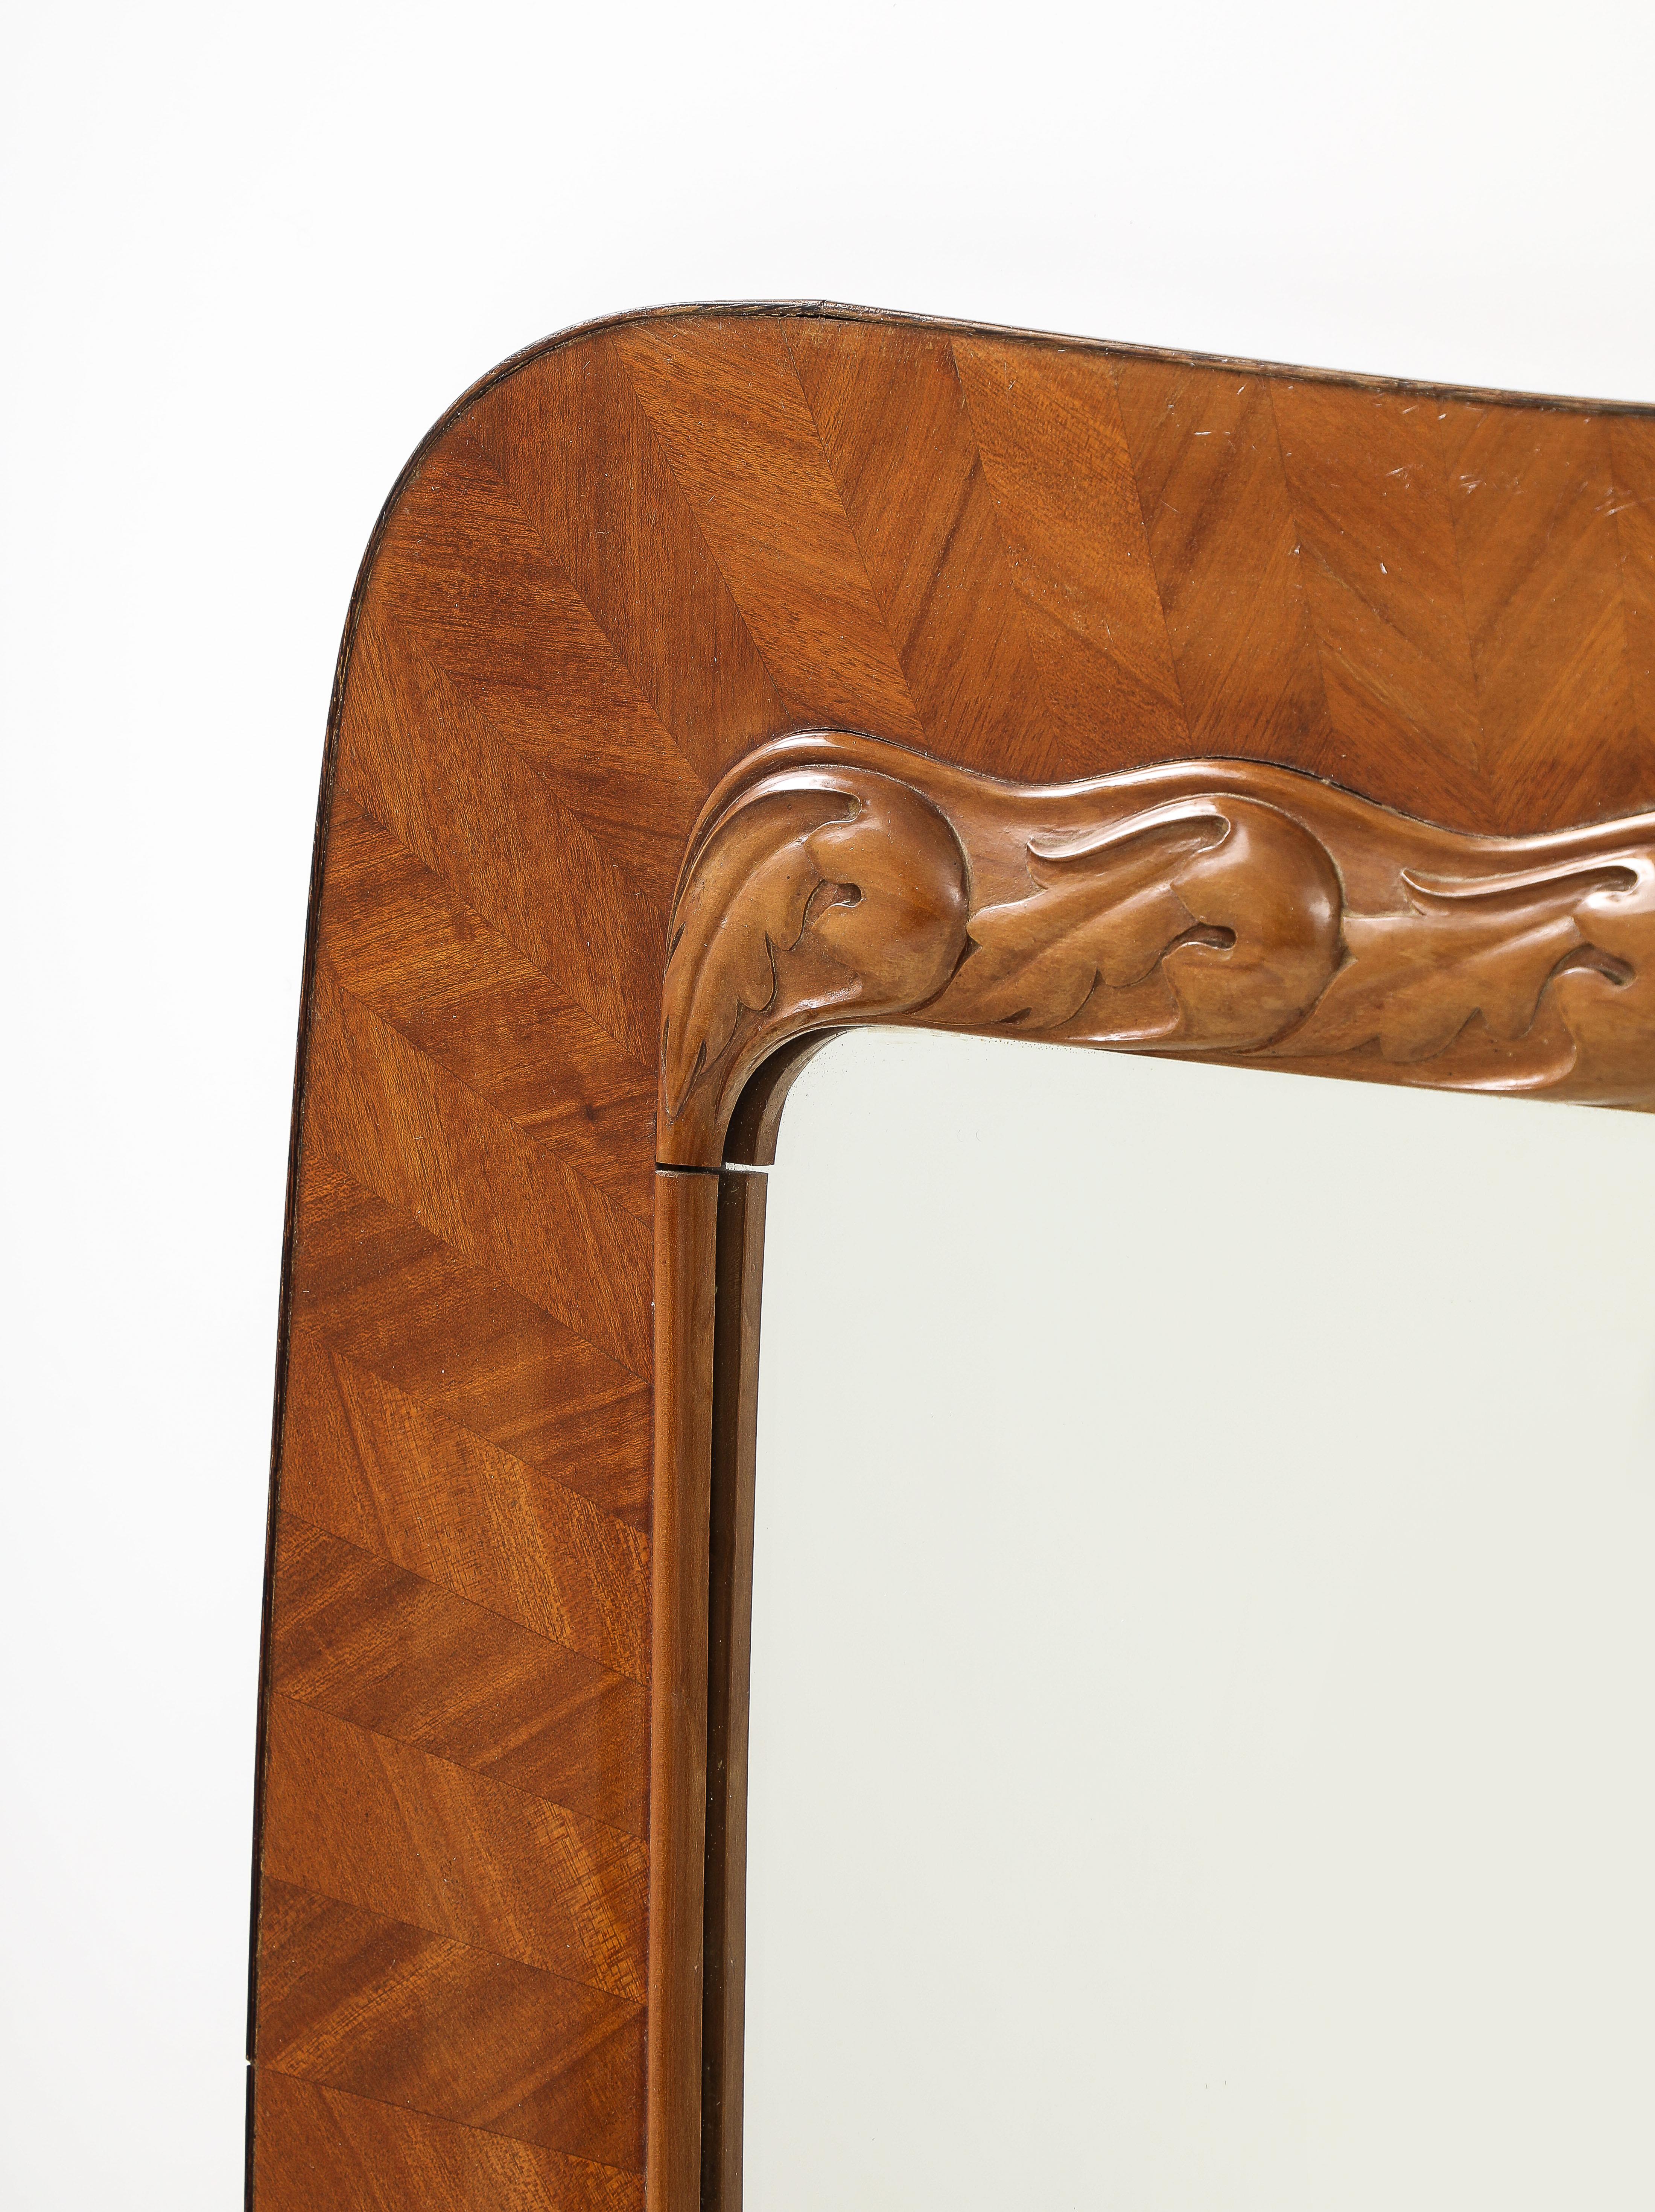 Hand-Carved Paolo Buffa for Serafino Arrighi Rare Walnut Radicca Mirror, Italy, 1930s For Sale